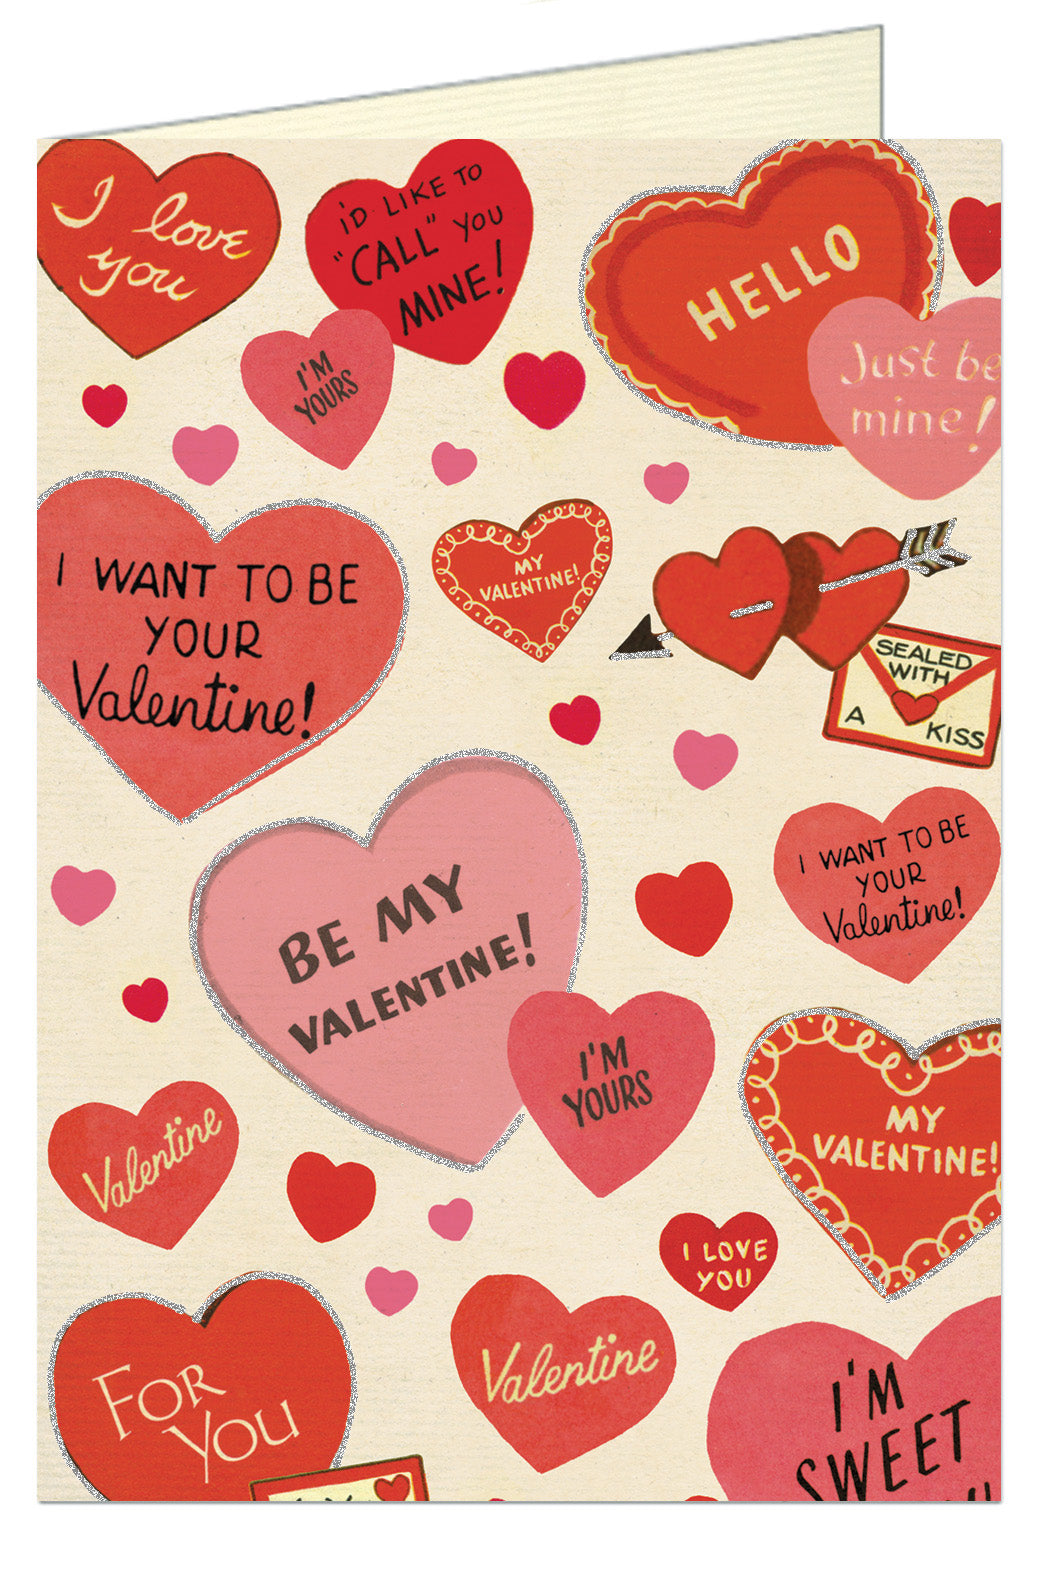 We Love These Vintage Valentines from the New York Public Library